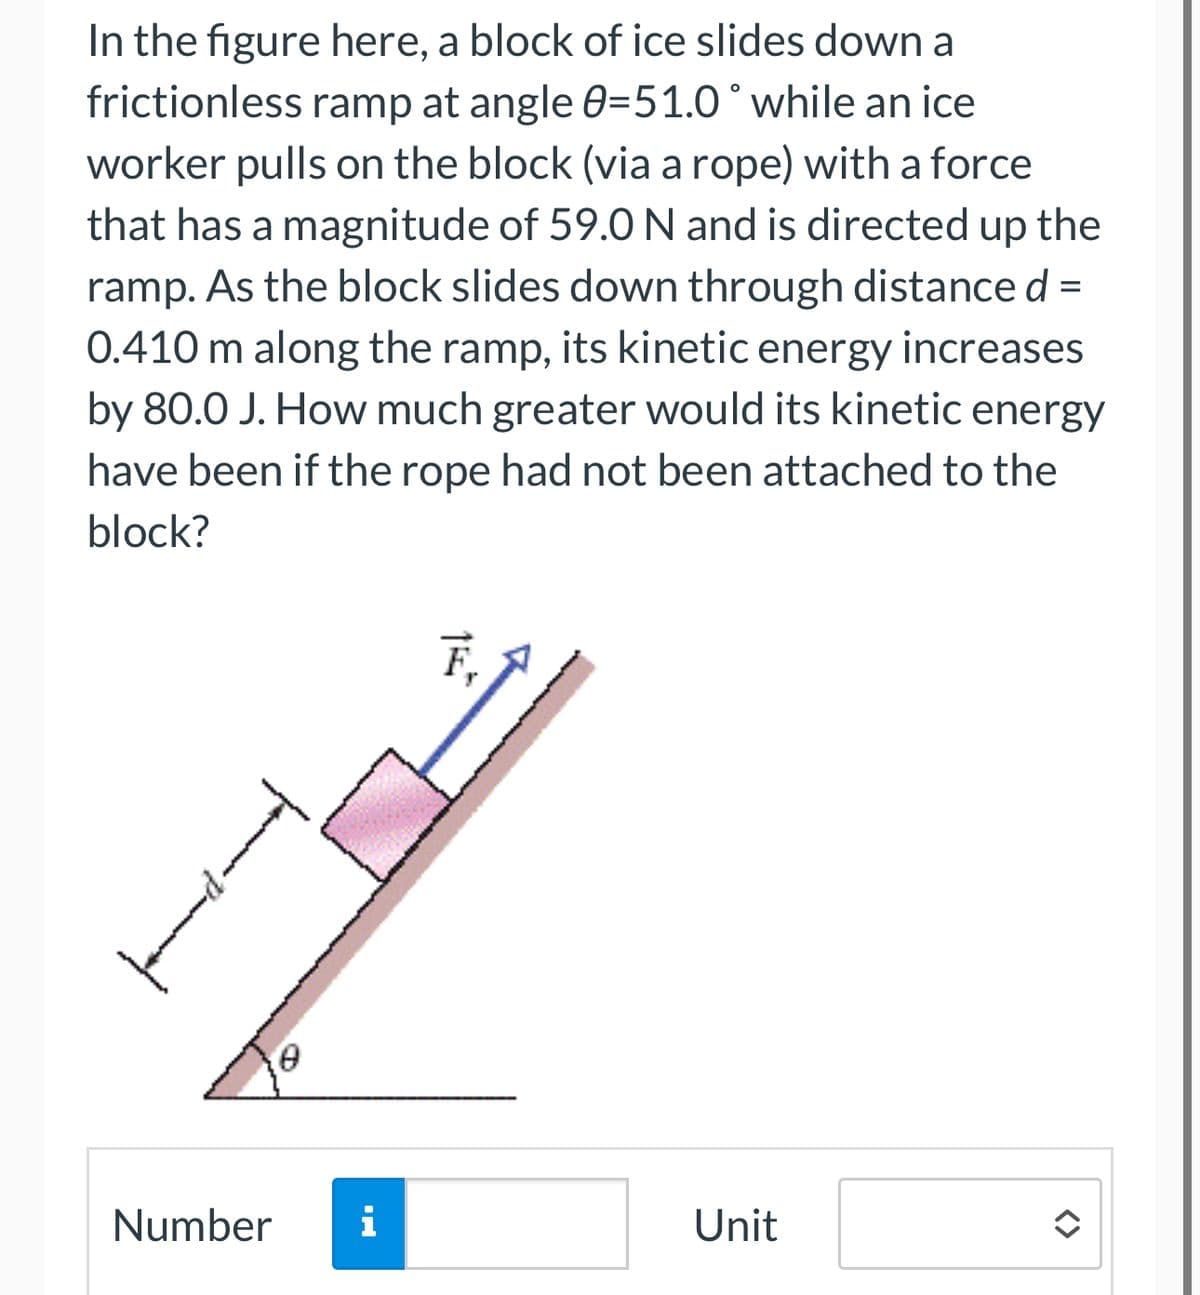 In the figure here, a block of ice slides down a
frictionless ramp at angle 0-51.0° while an ice
worker pulls on the block (via a rope) with a force
that has a magnitude of 59.0 N and is directed up the
ramp. As the block slides down through distance d
0.410 m along the ramp, its kinetic energy increases
by 80.0 J. How much greater would its kinetic energy
have been if the rope had not been attached to the
block?
=
F₁
Number i
Unit
<>